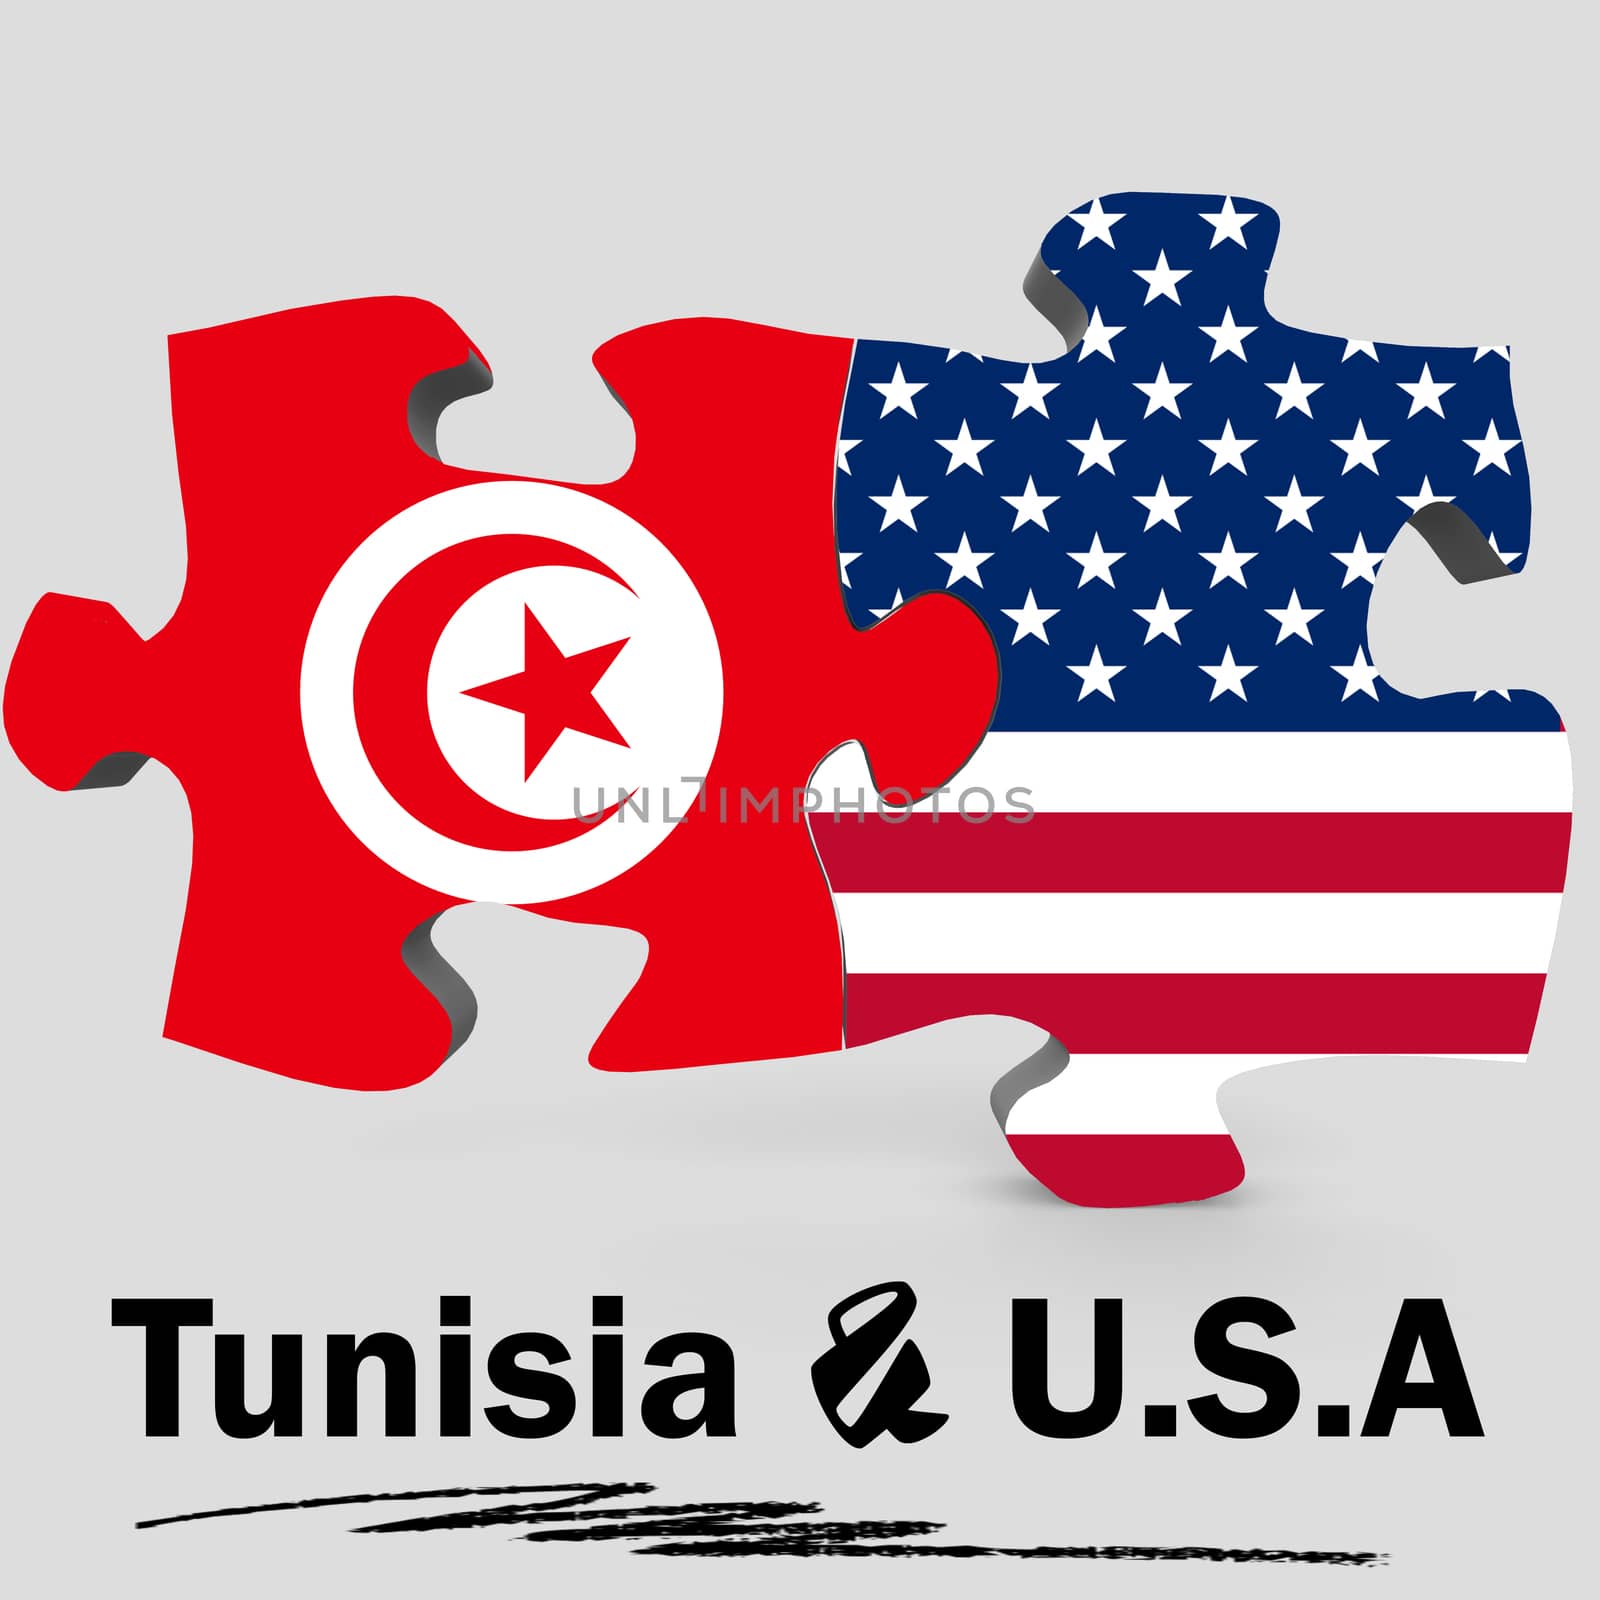 USA and Tunisia Flags in puzzle isolated on white background, 3D rendering